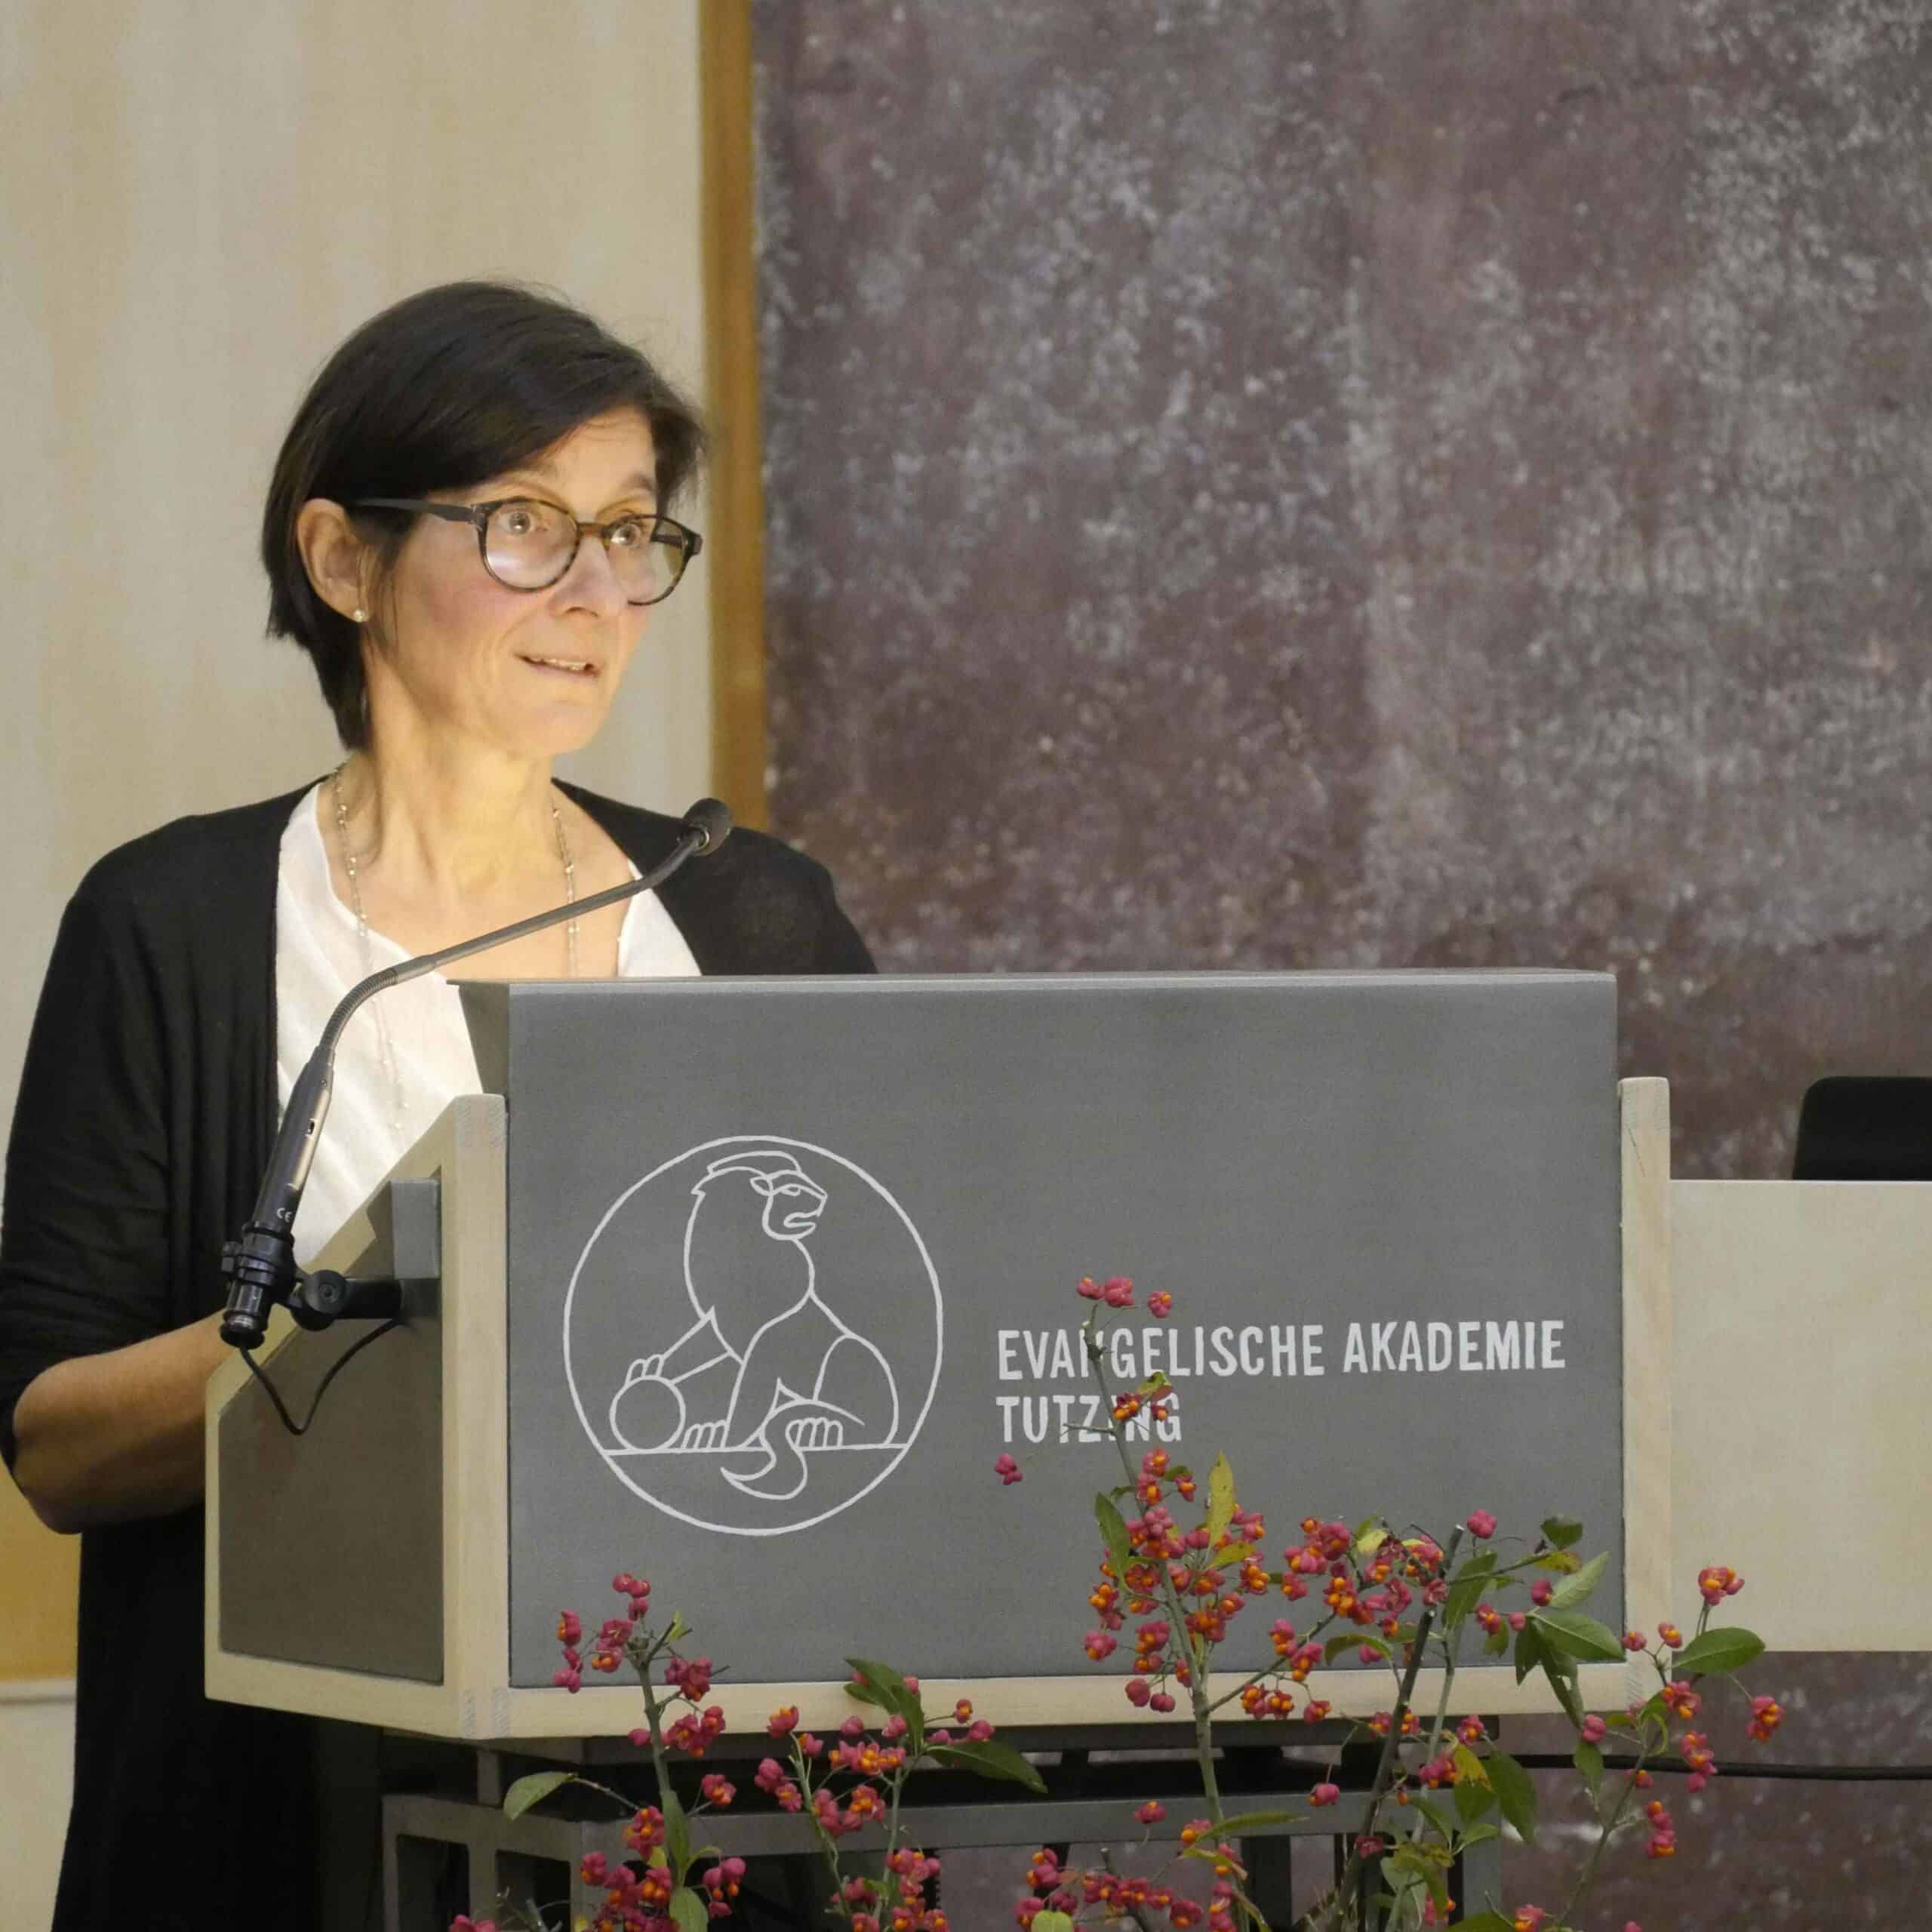 Dr. Dorothee Halcour